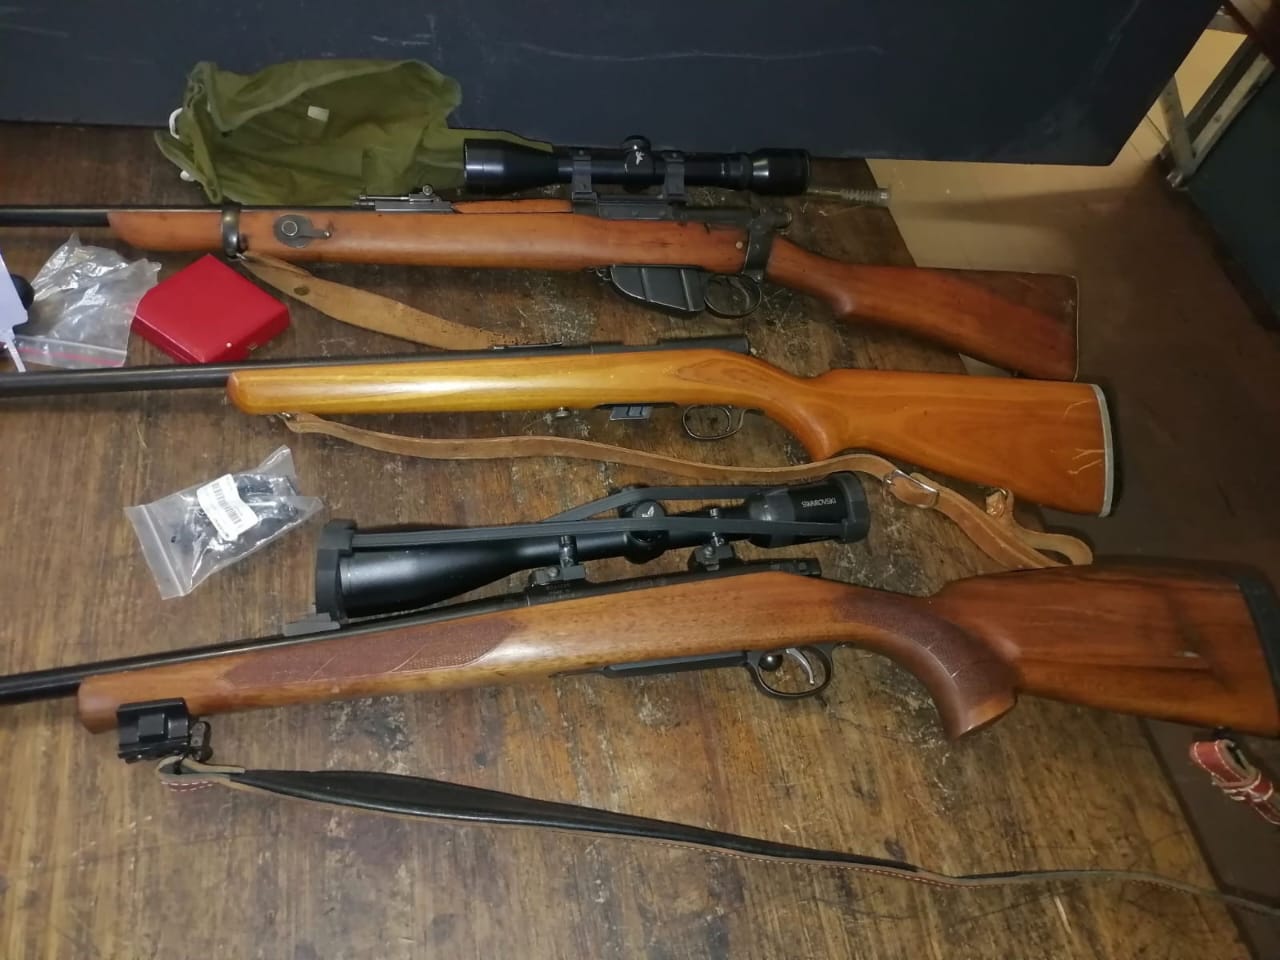 Three stolen rifles recovered in Ravensmead